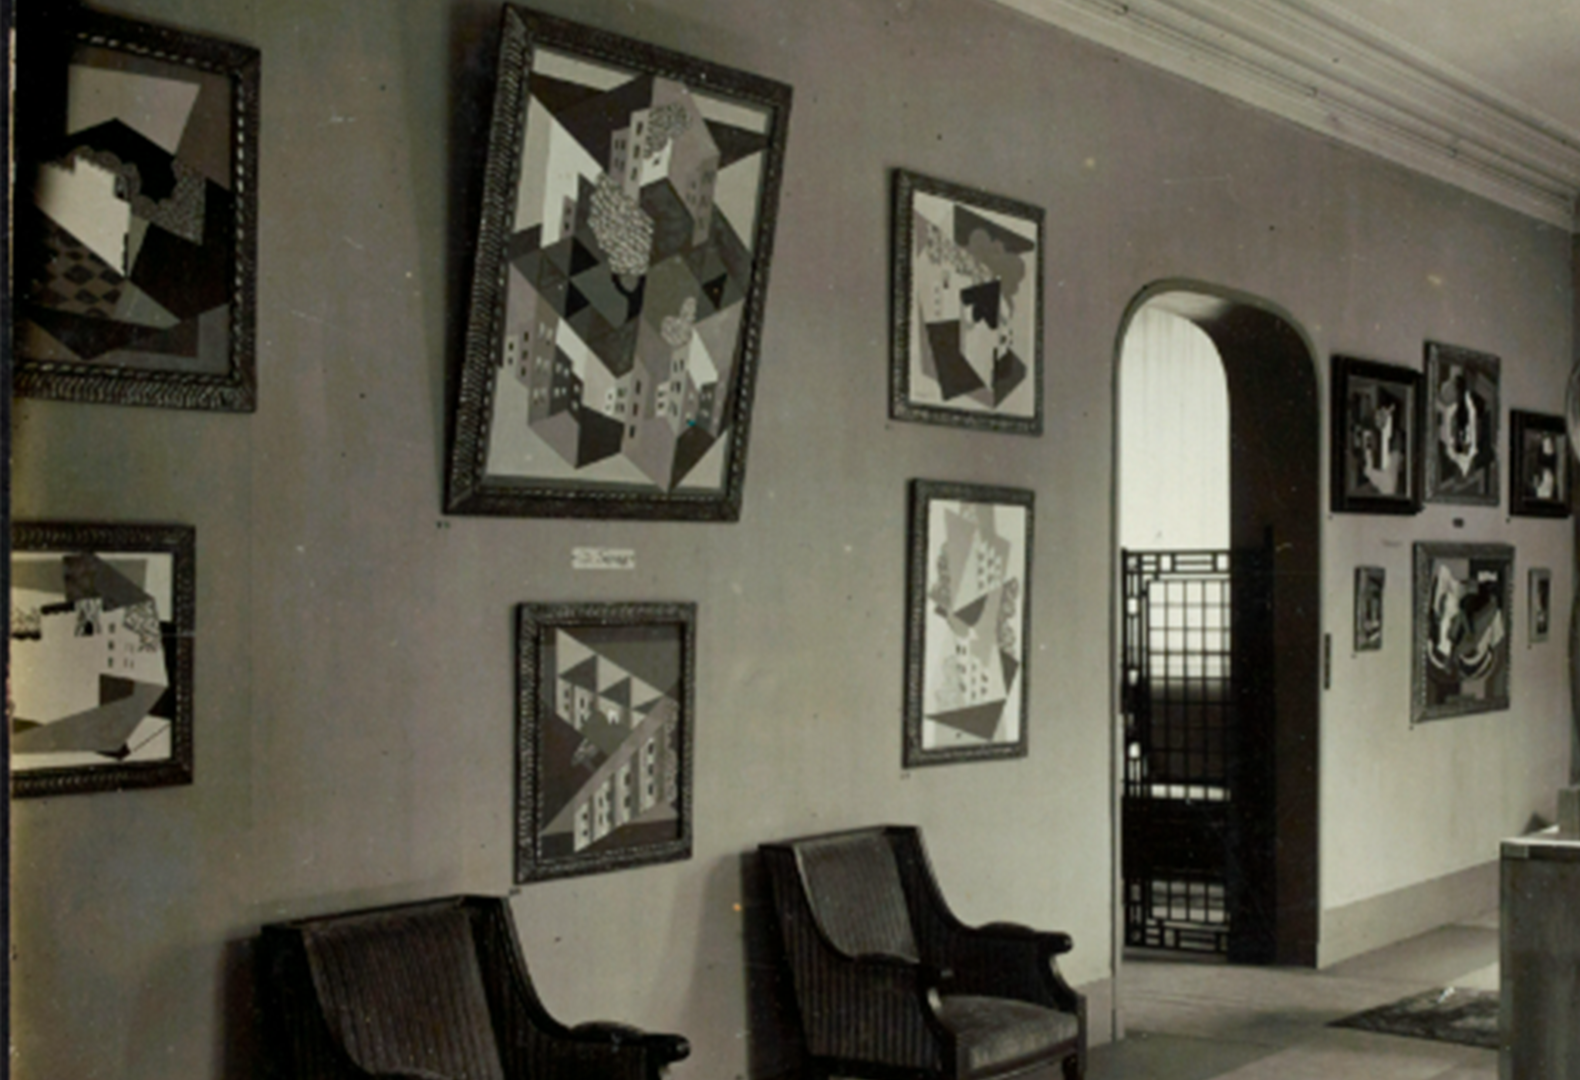 Black and white photo of a wall from a group exhibition of works at Galerie de l’Effort Moderne in 1921